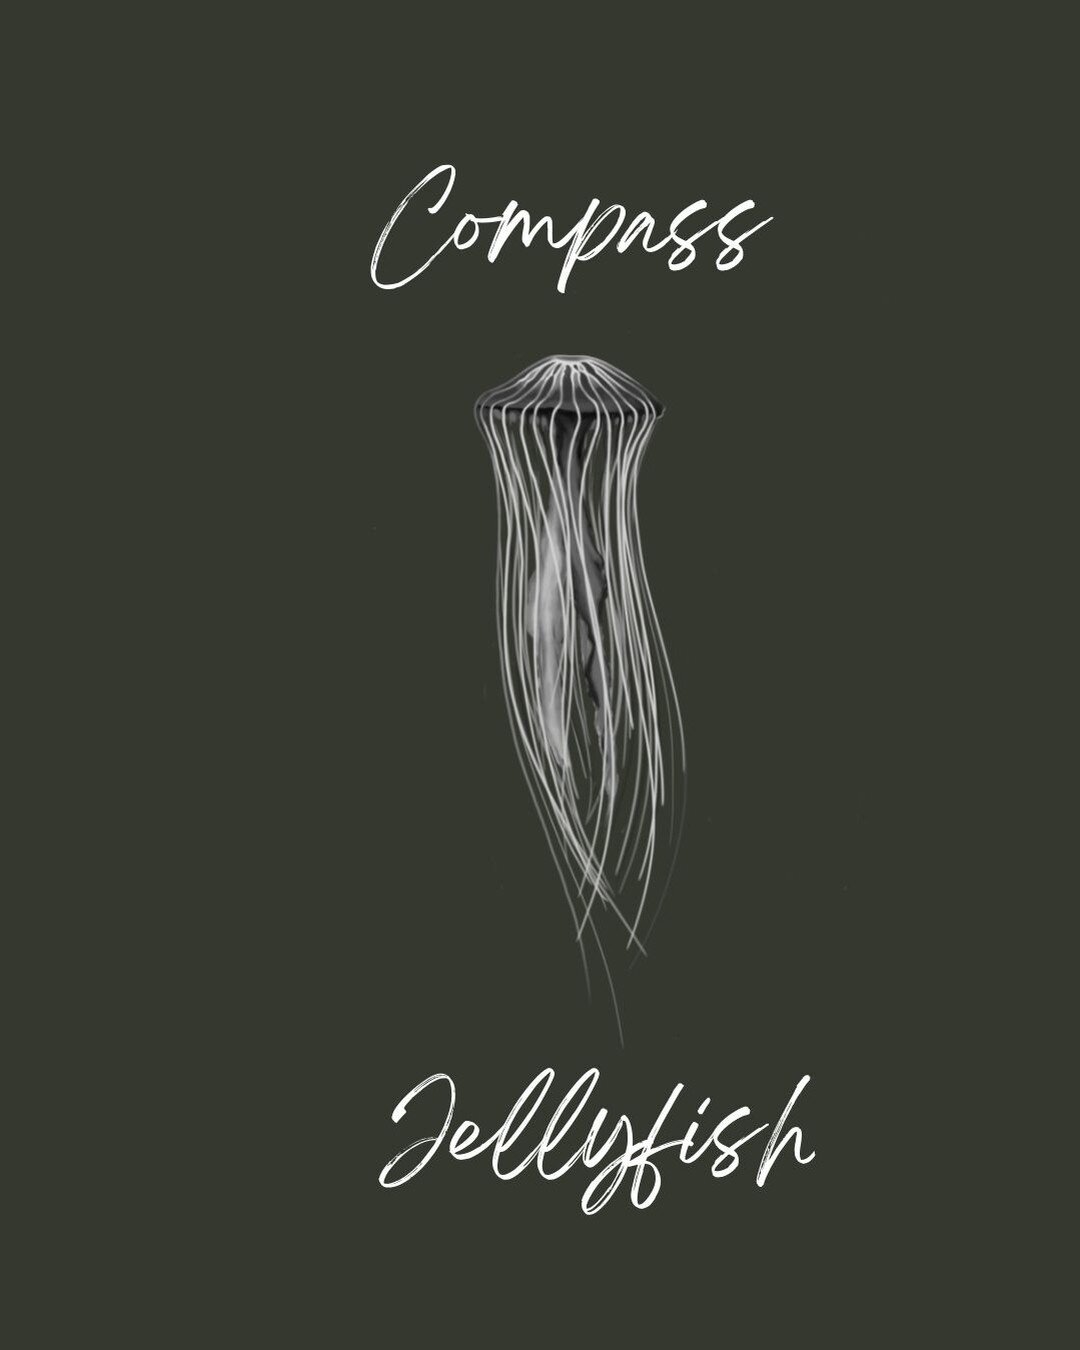 Do you think Compass Jellyfish can help you navigate? Lets find out!